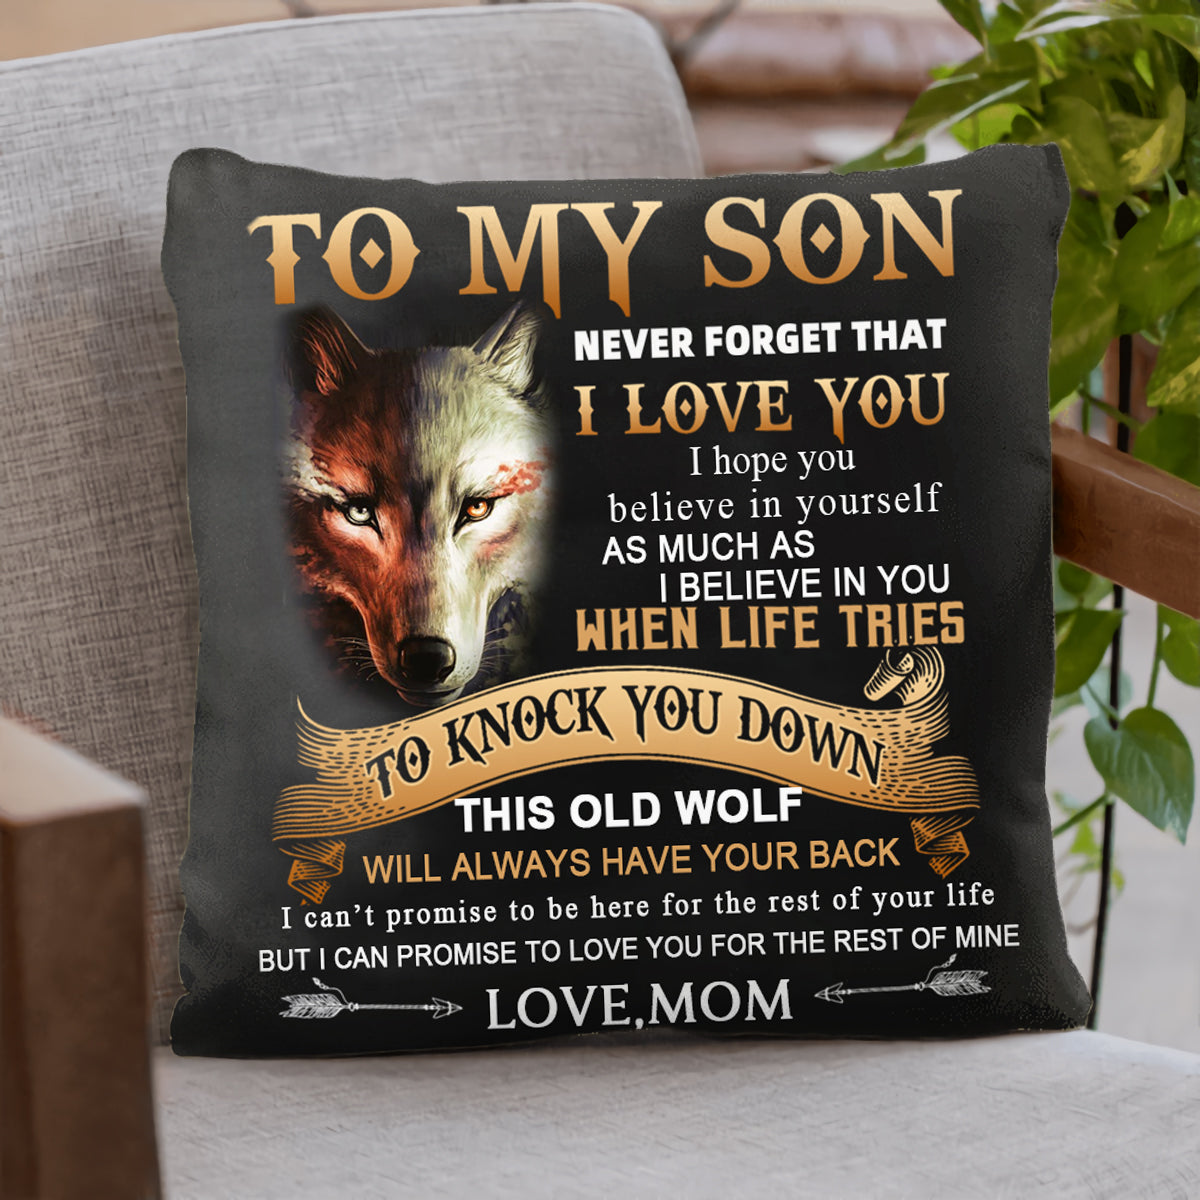 Mom To Son - Never Forget I Love You - Pillow Case